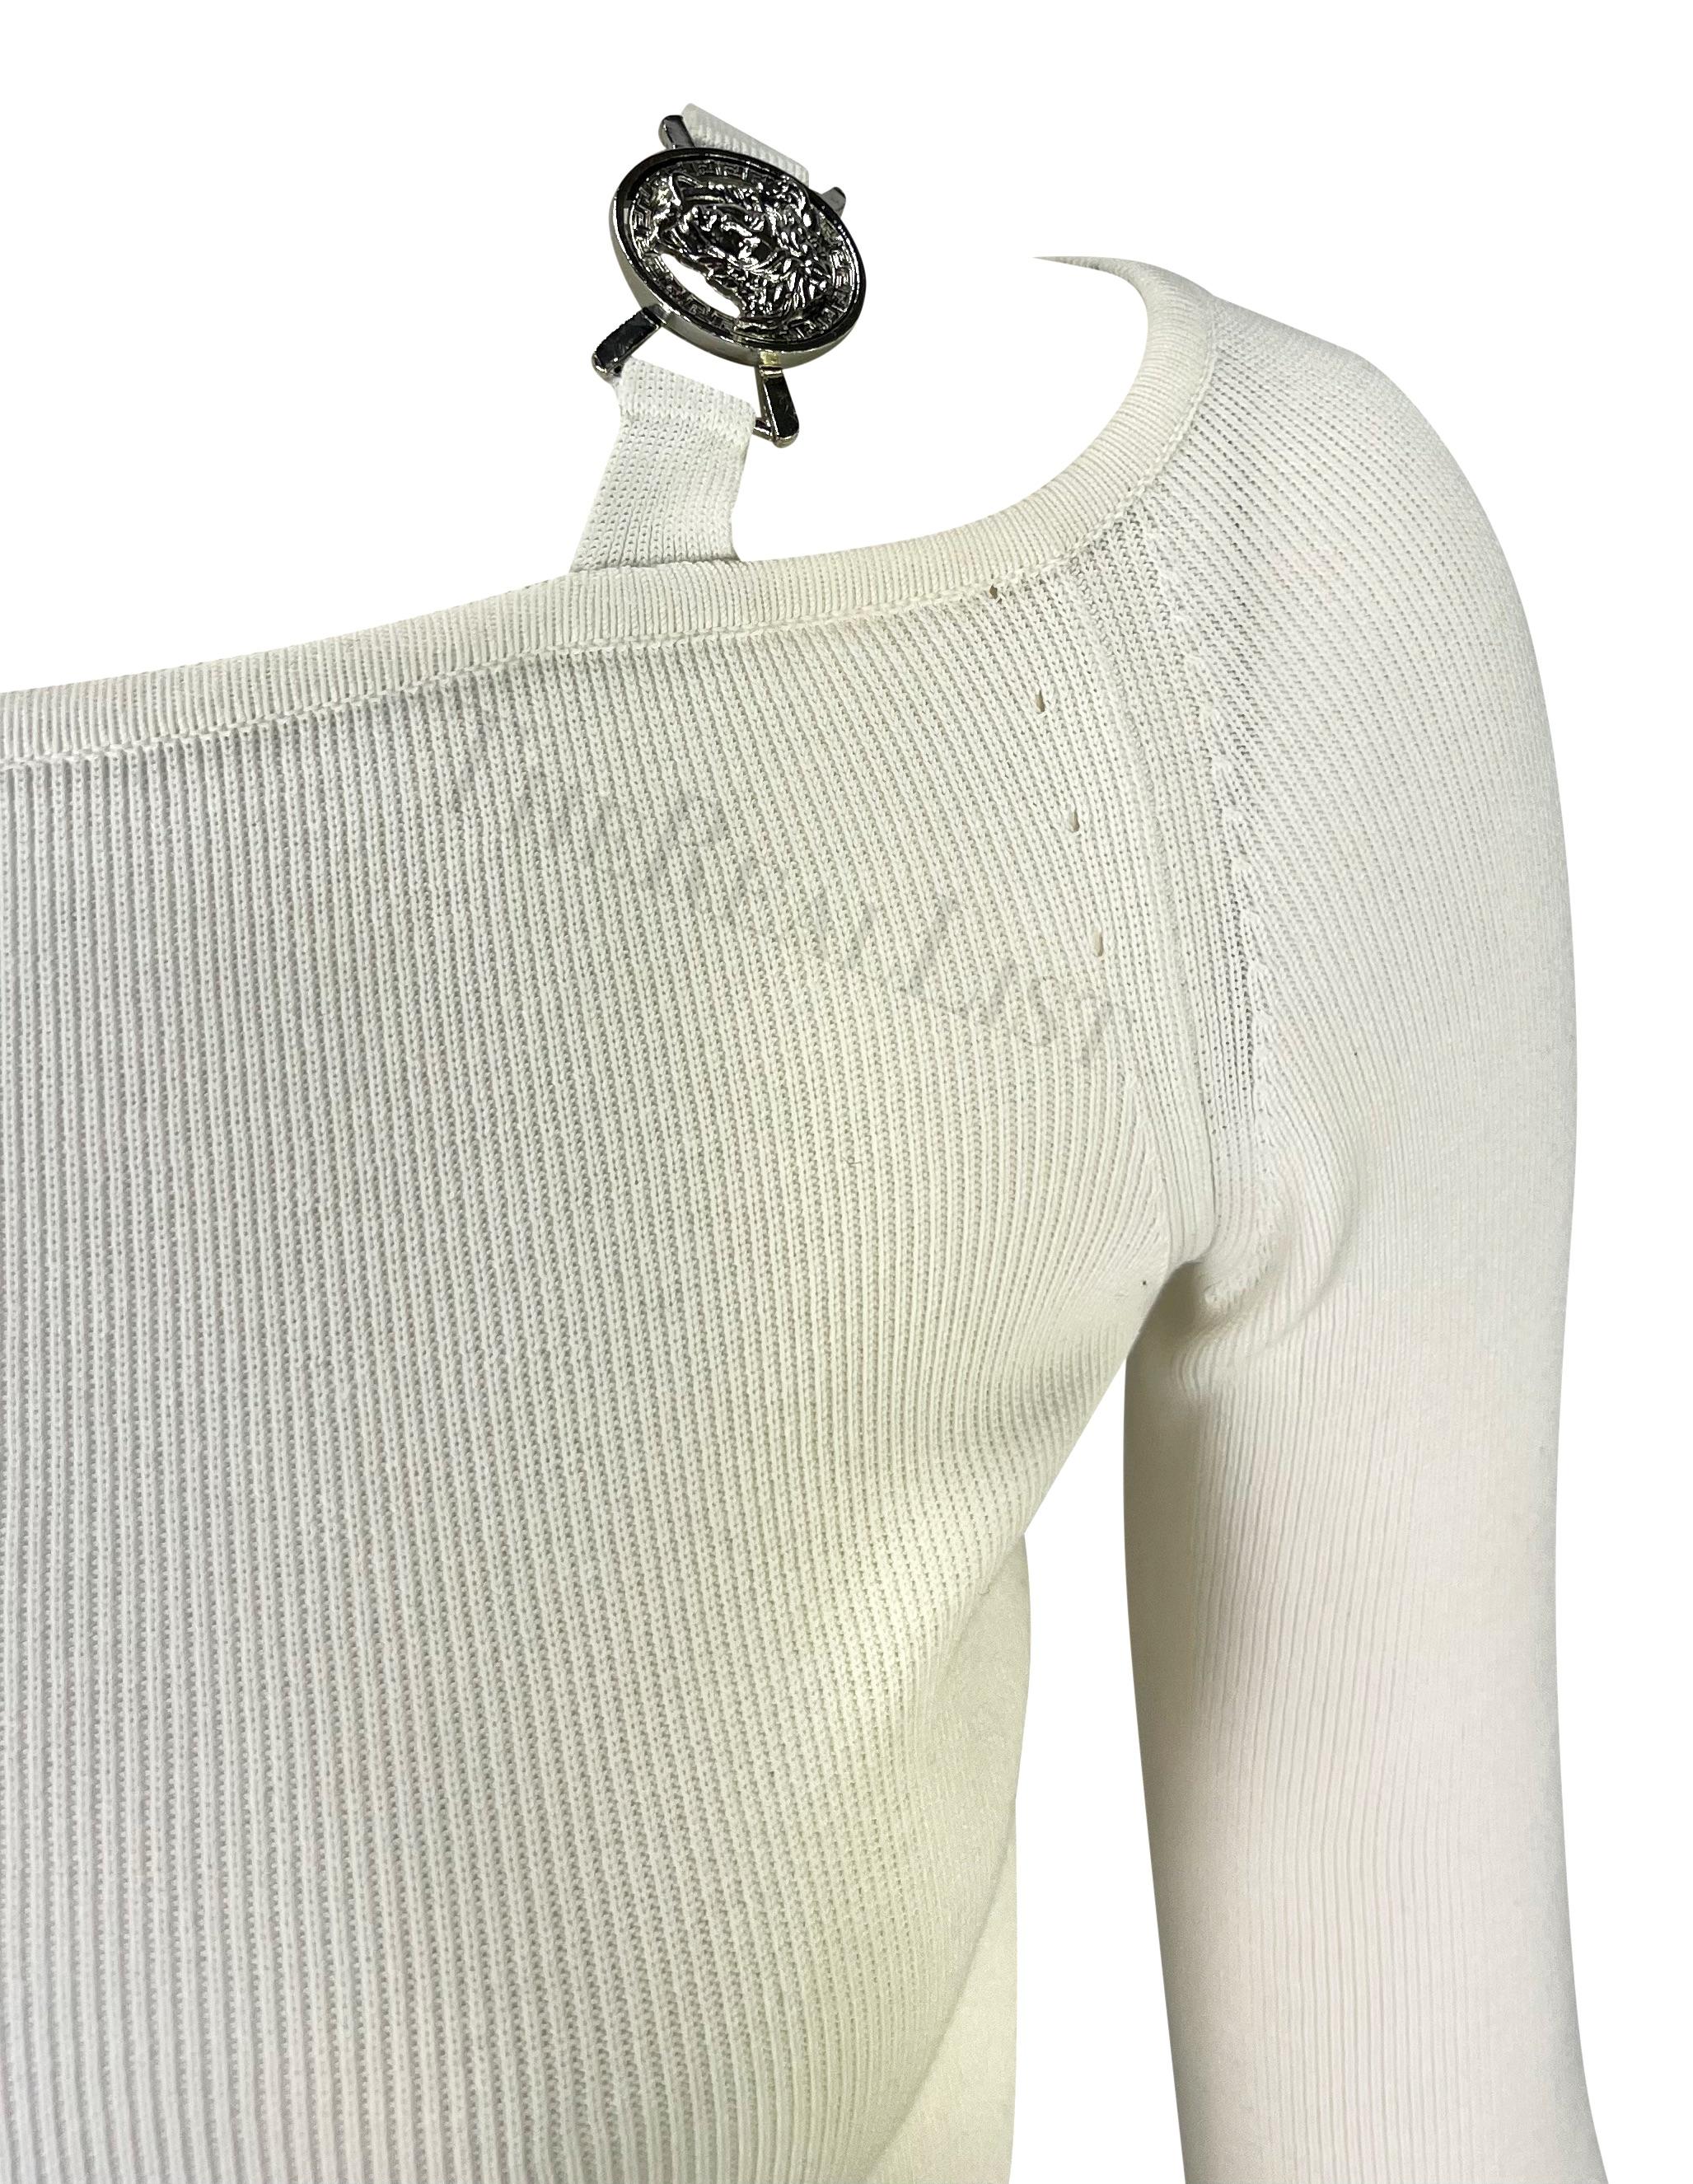 S/S 2005 Versace by Donatella Medusa Medallion Buckle White Knit Stretch Top For Sale 4